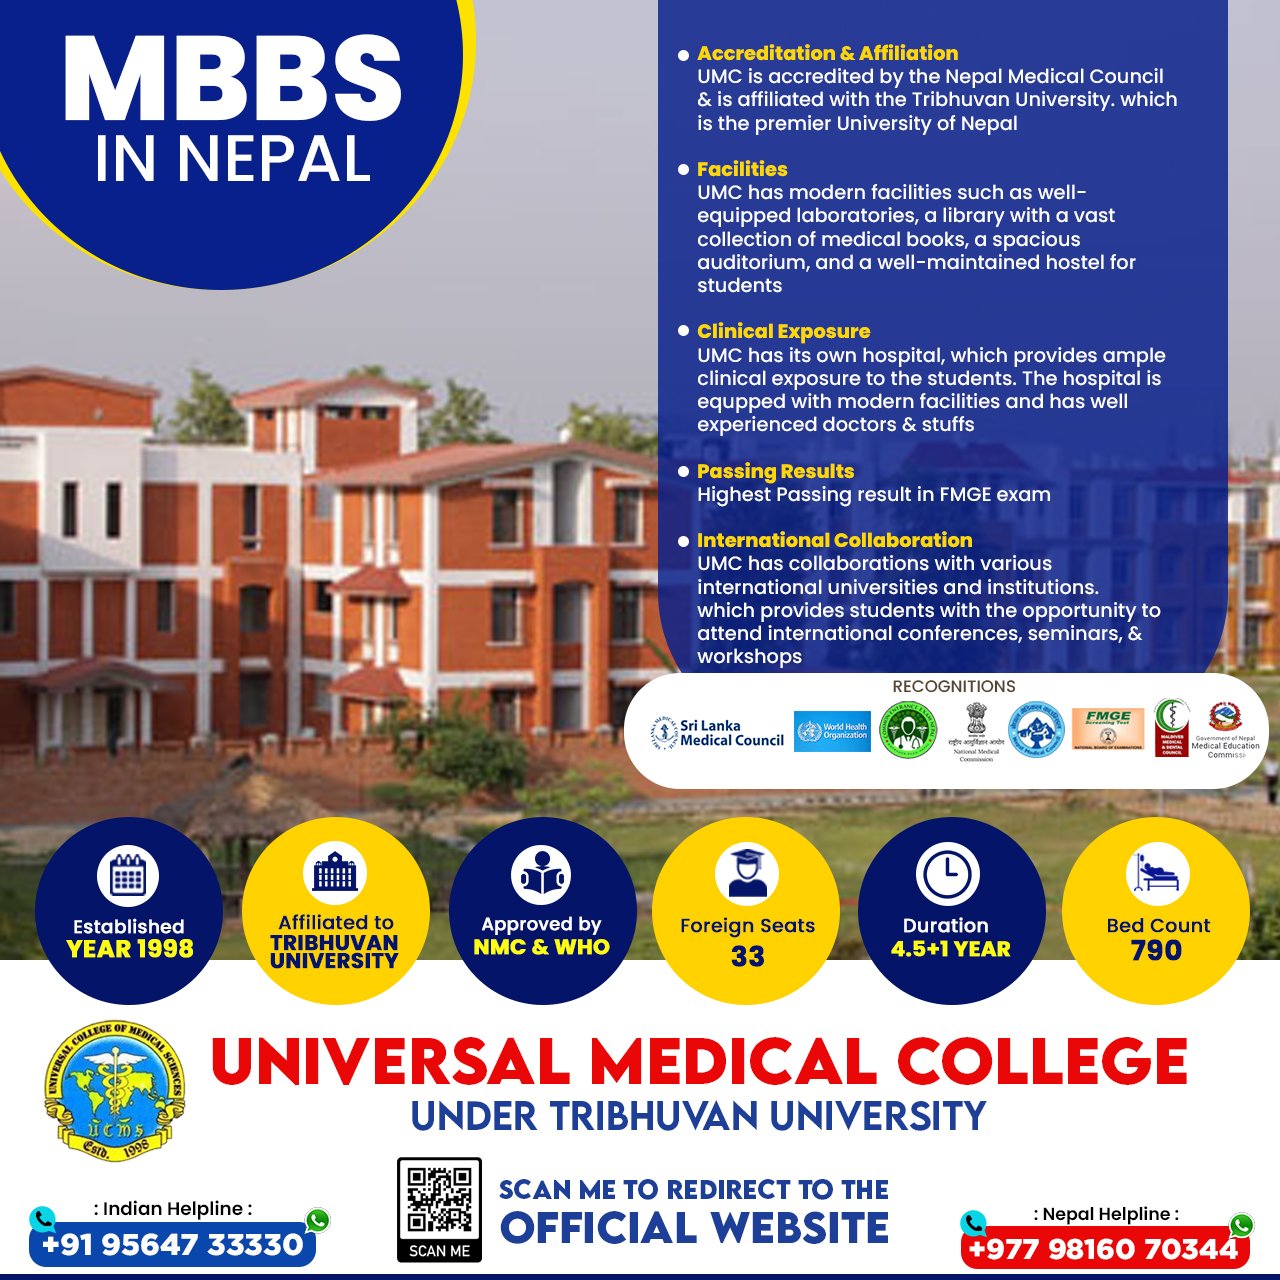 mbbs-in-nepal-at-universal-medical-college-nepal-under-tribhuvan-university